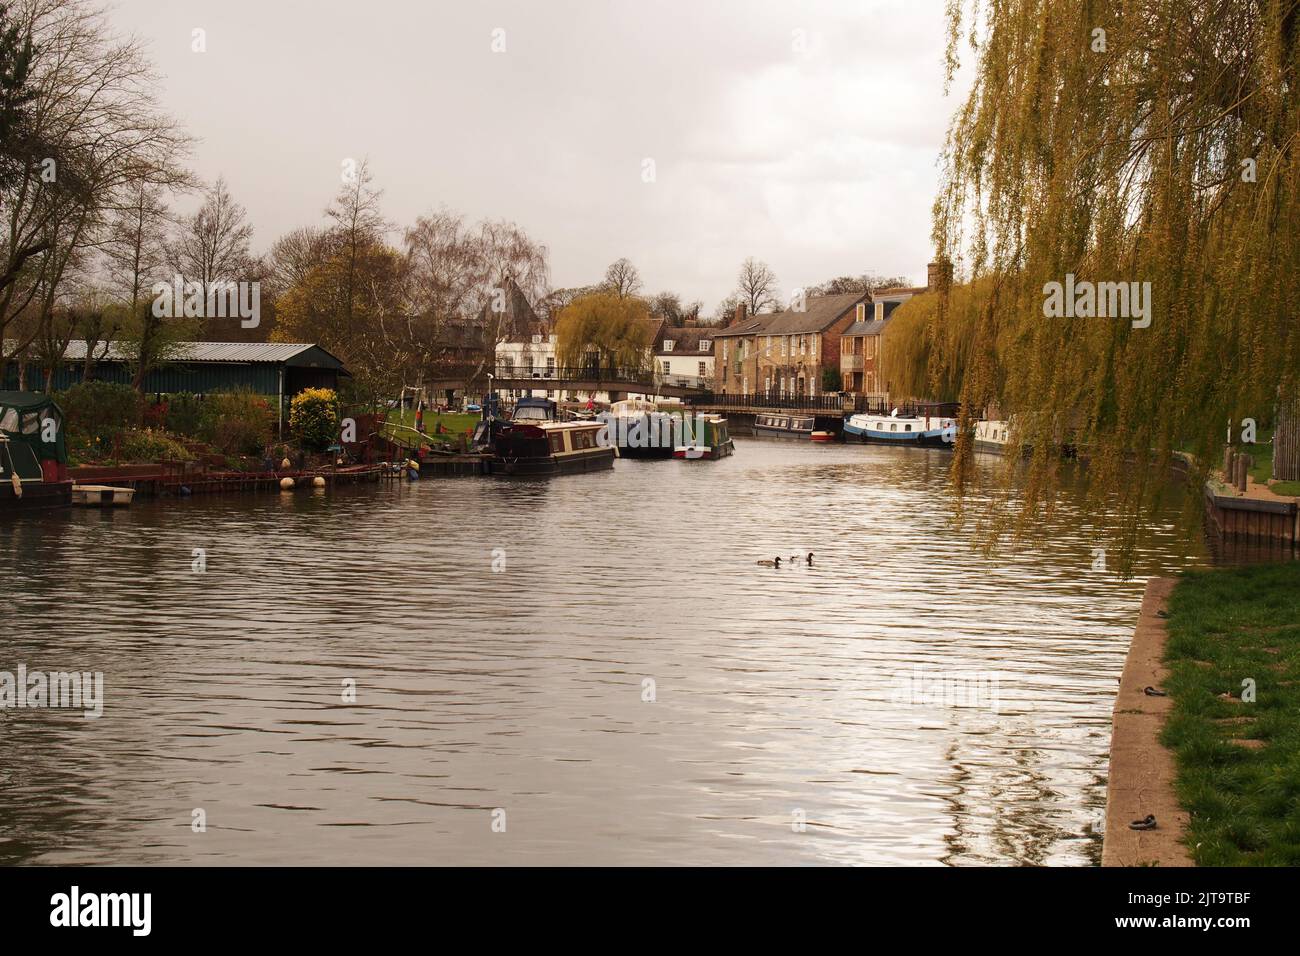 A view of the canal basin at Ely, Cambridgeshire, England, with moored barges, waterside buildings and a weeping willow tree Stock Photo